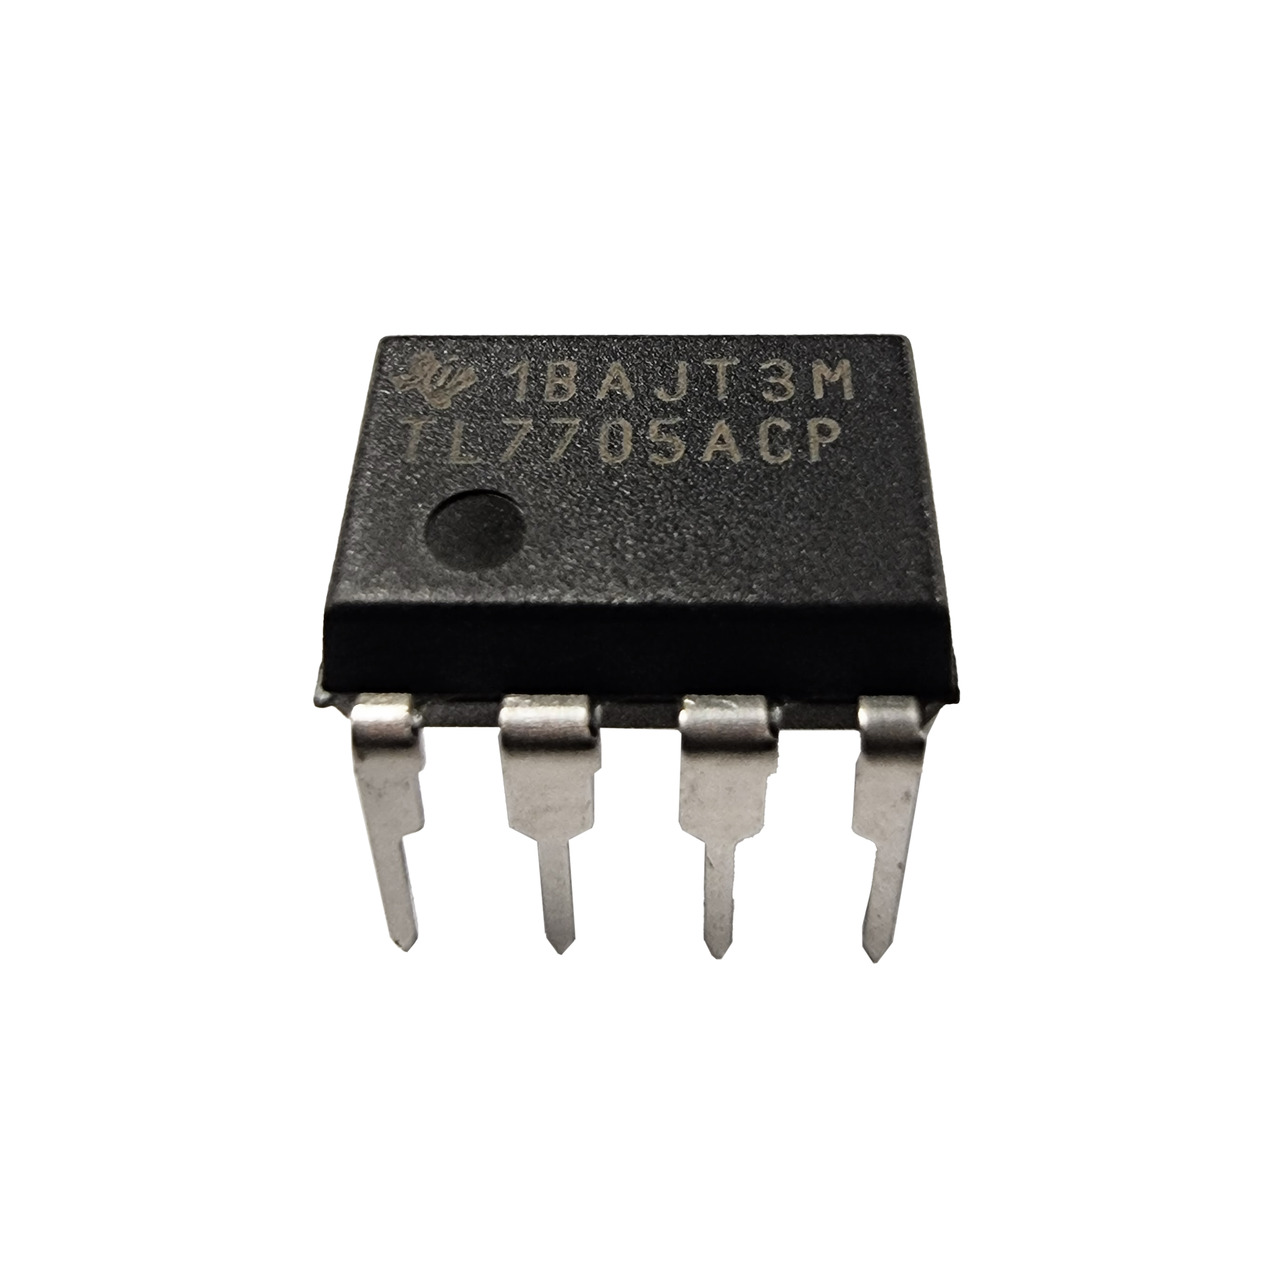 ON Semiconductor Unterspannungssensor MC34064P-5- 4-54-7 V- TO92